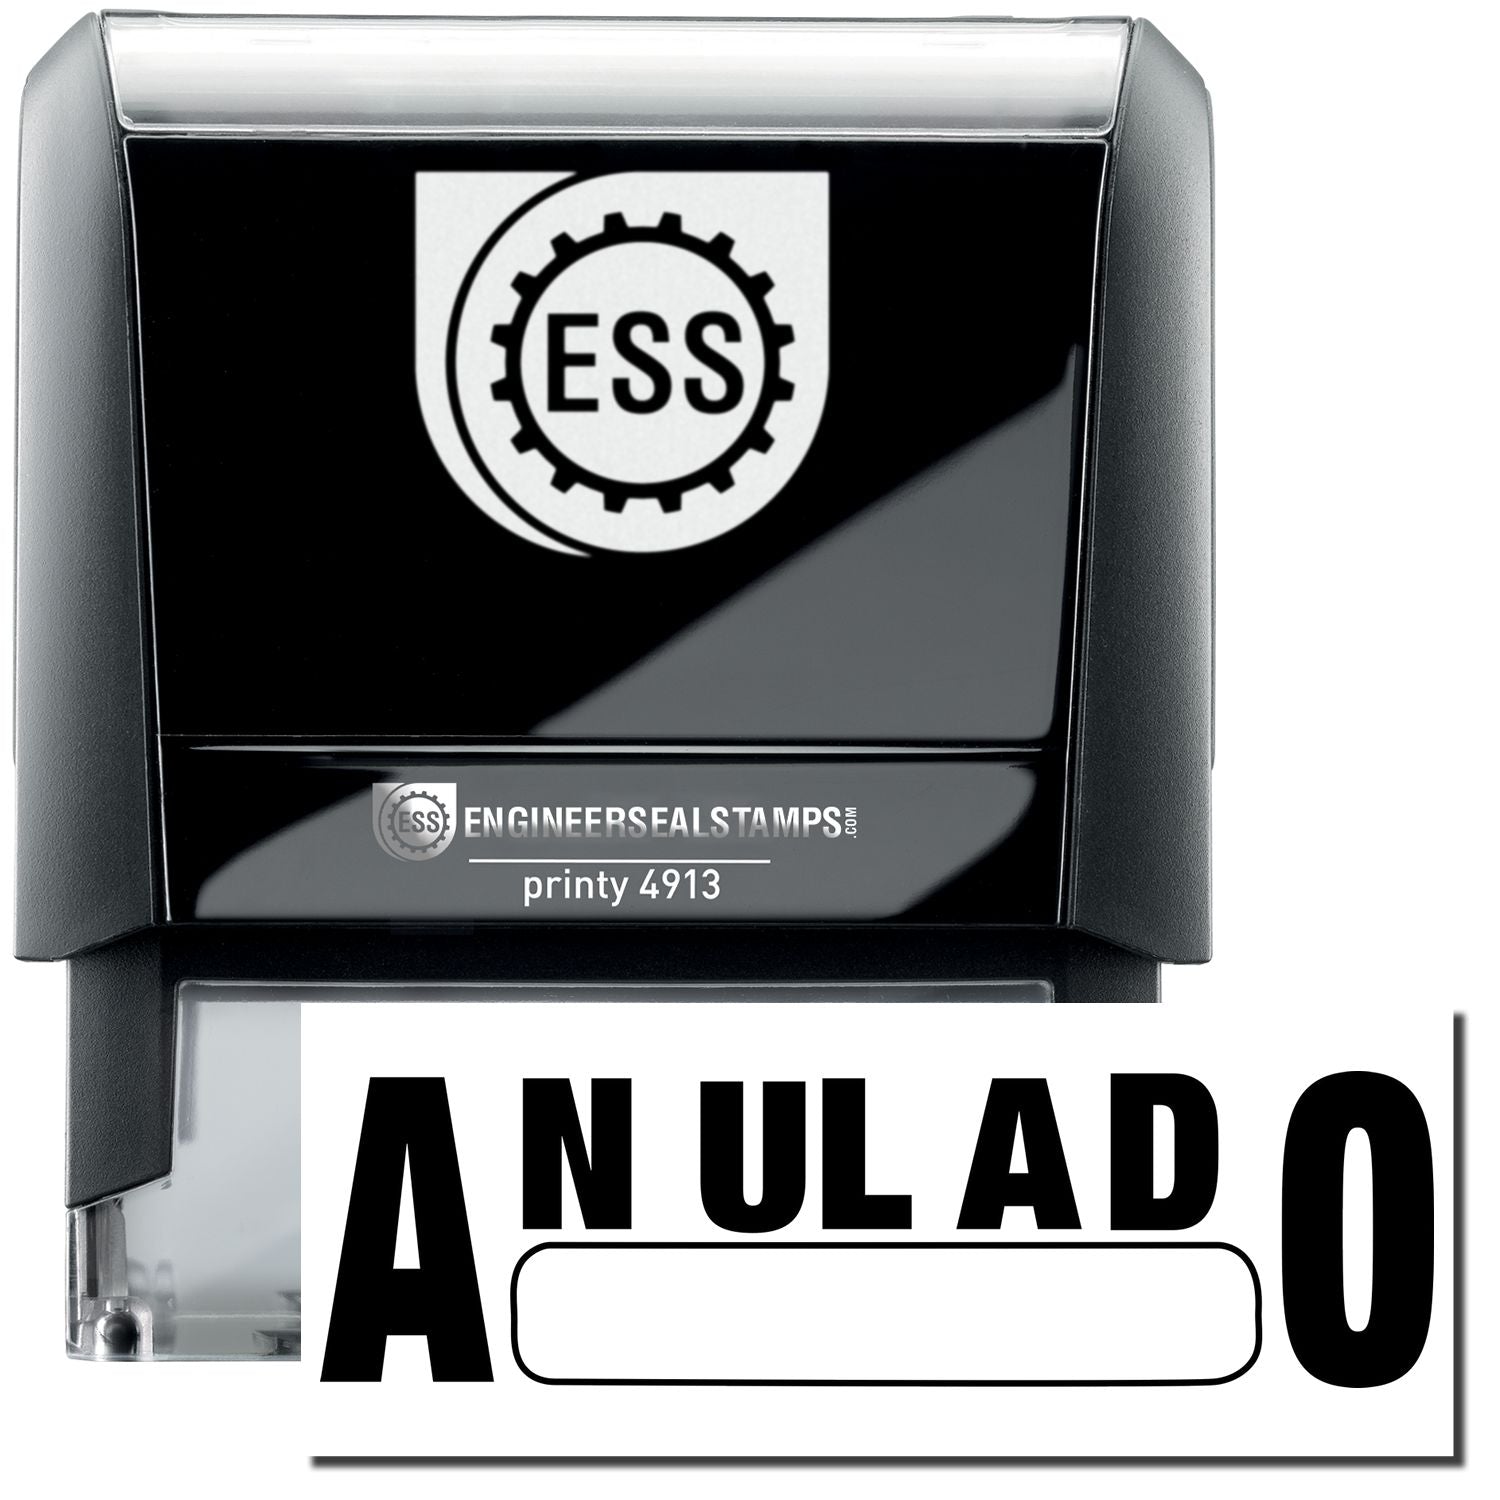 A self-inking stamp with a stamped image showing how the text "ANULADO" in a large font with a Box under it is displayed after stamping.